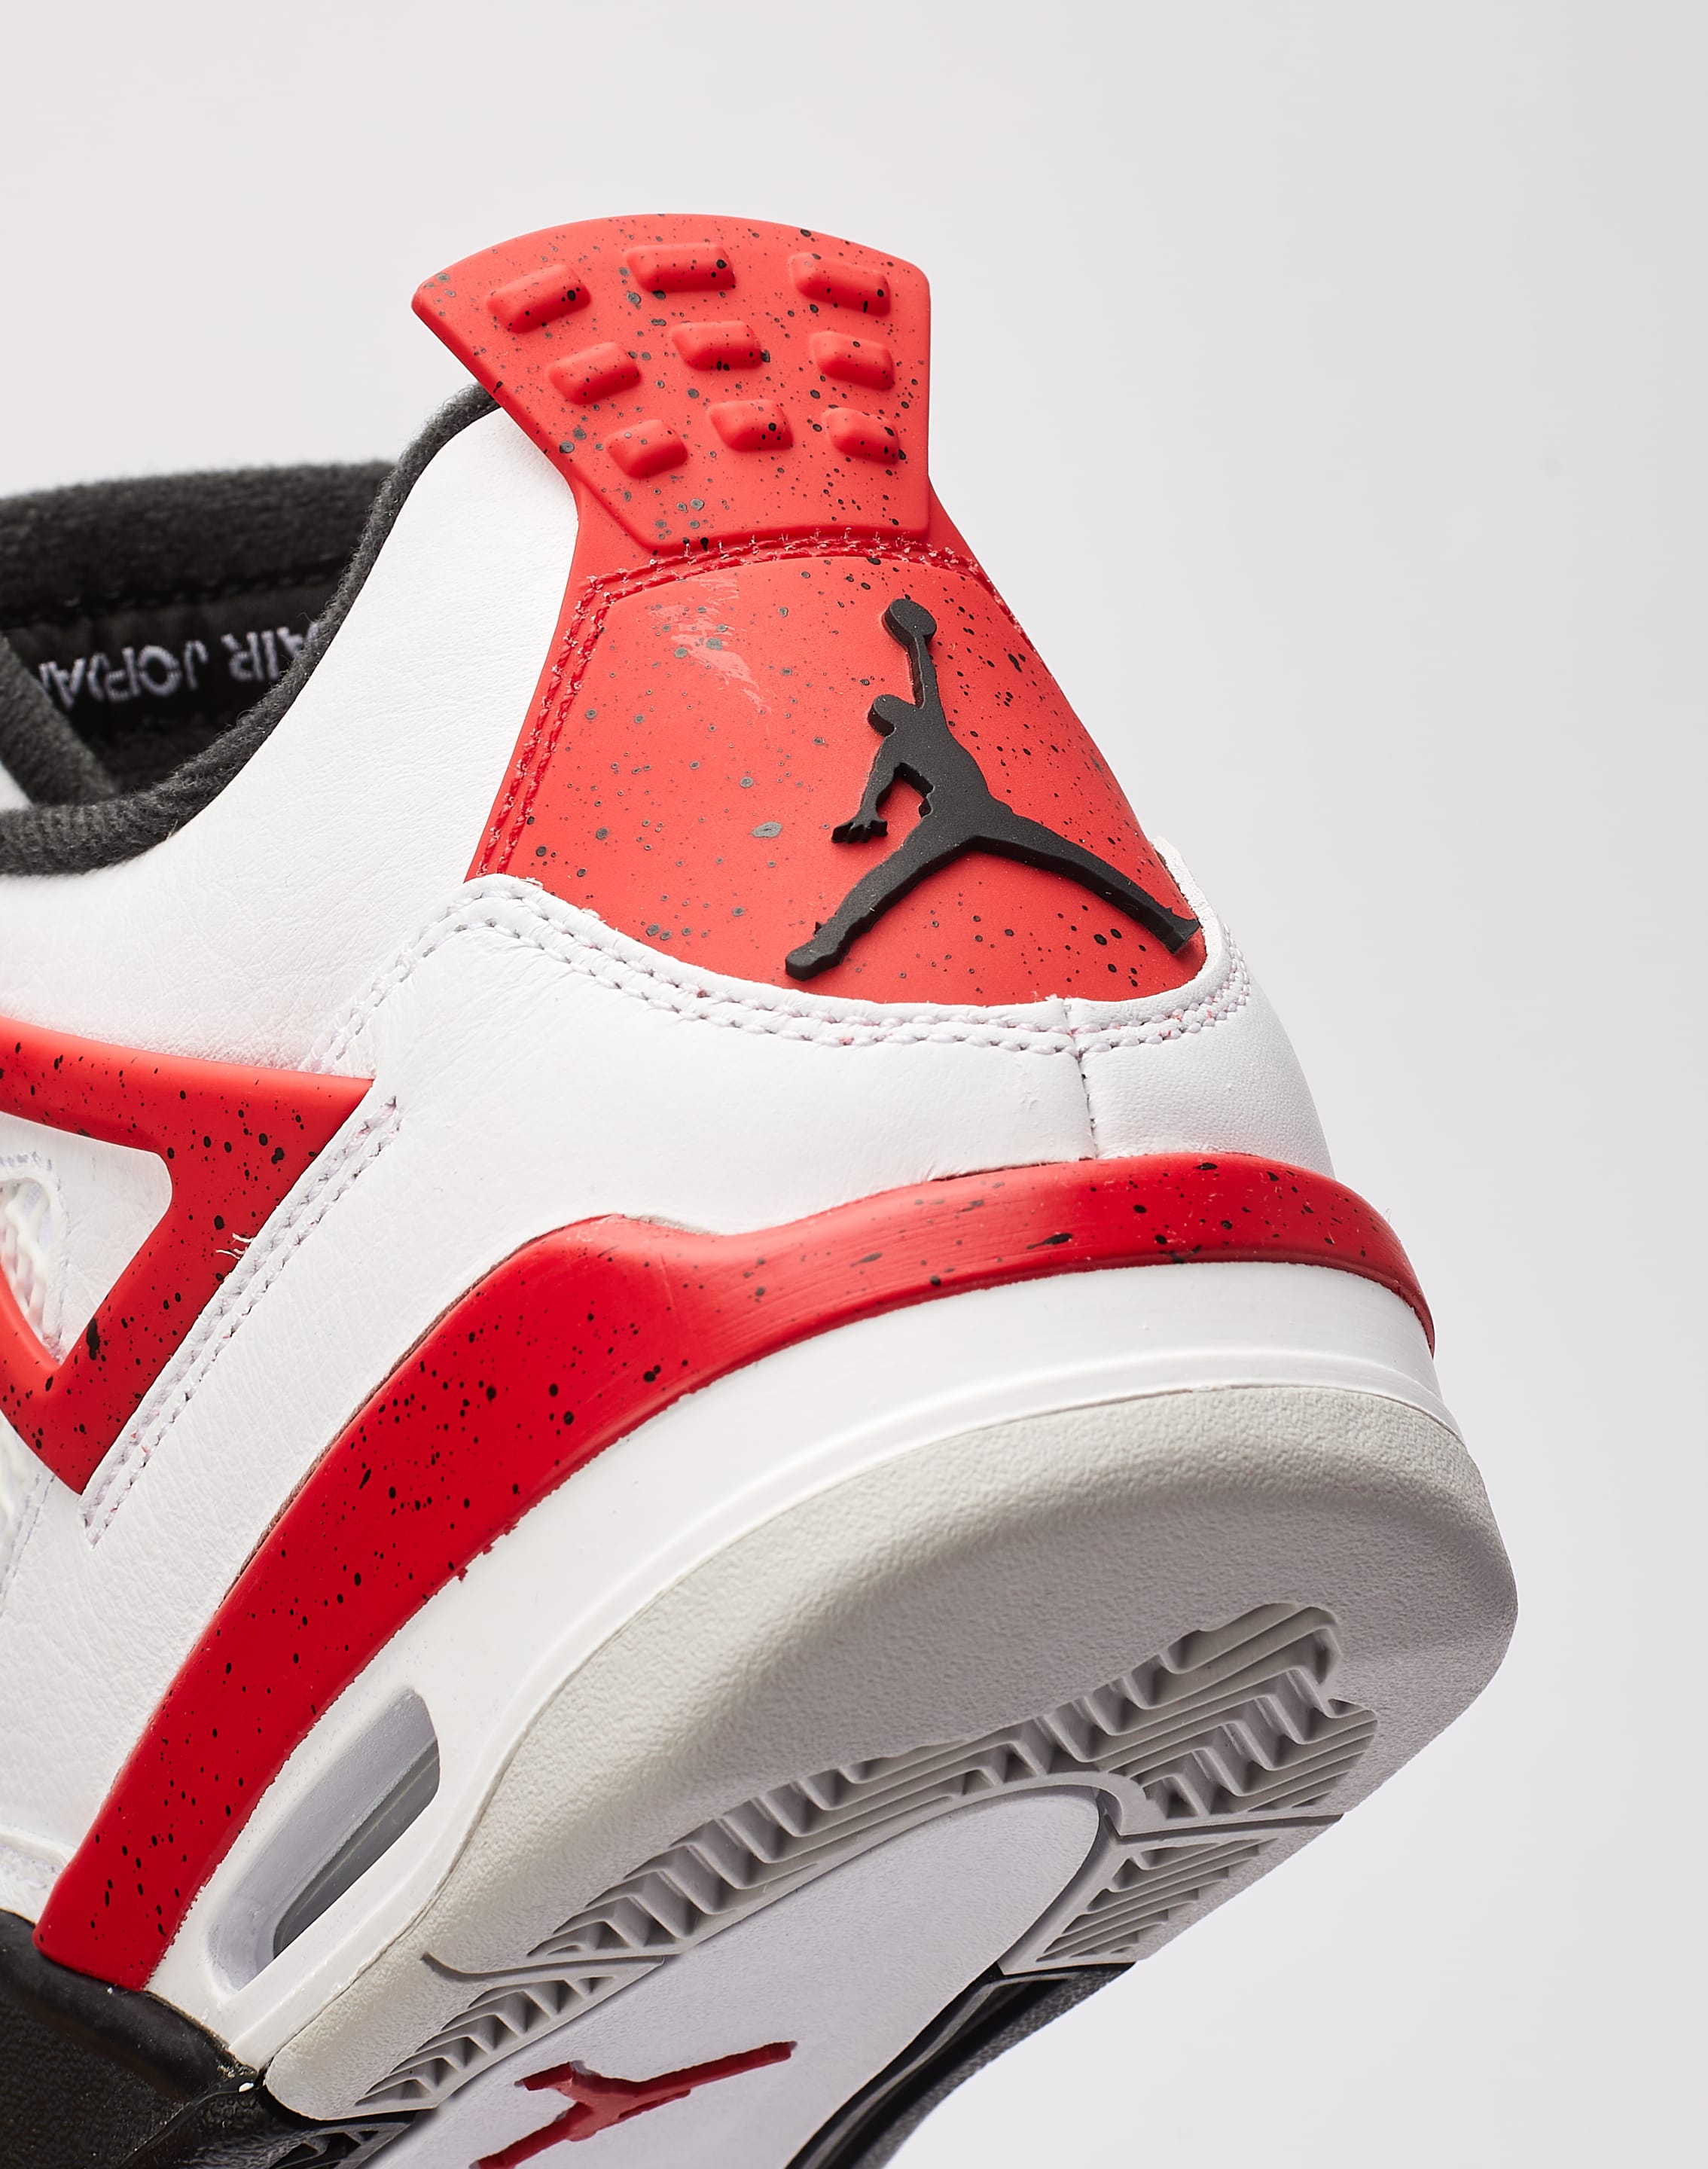 Heating Up With The Air Jordan 4 “Fire Red” – DTLR